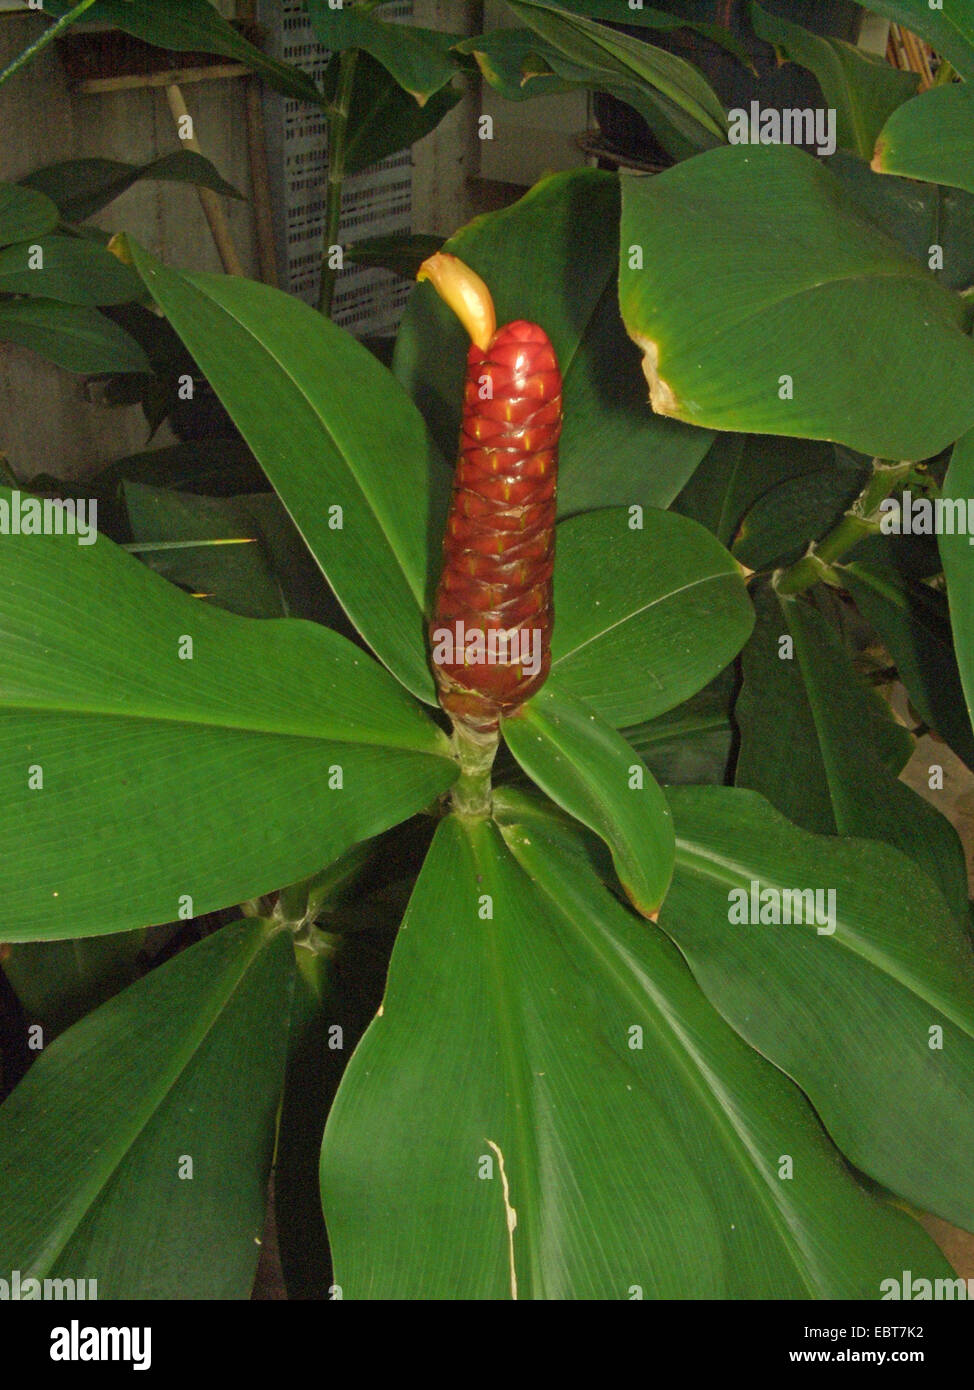 Spiral ginger (Costus scaber), blooming Stock Photo